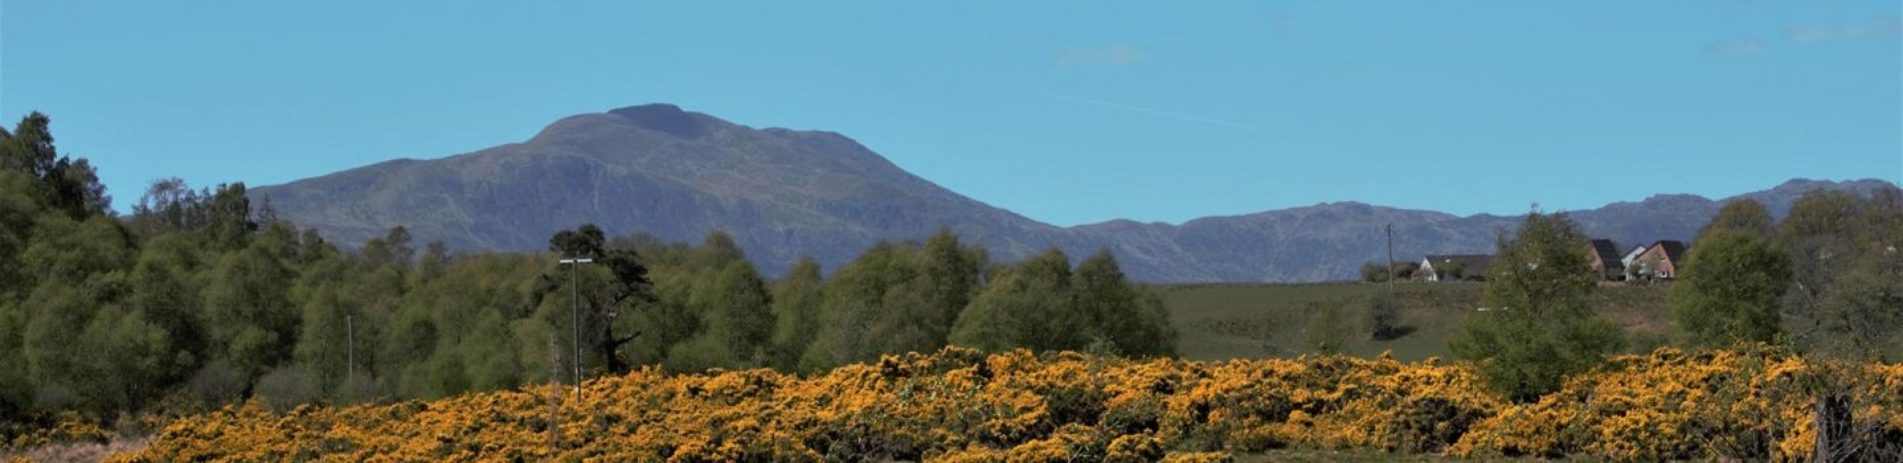 cock-hill-and-forests-seen-above-field-full-of-yellow-gorse-flowers-bushes